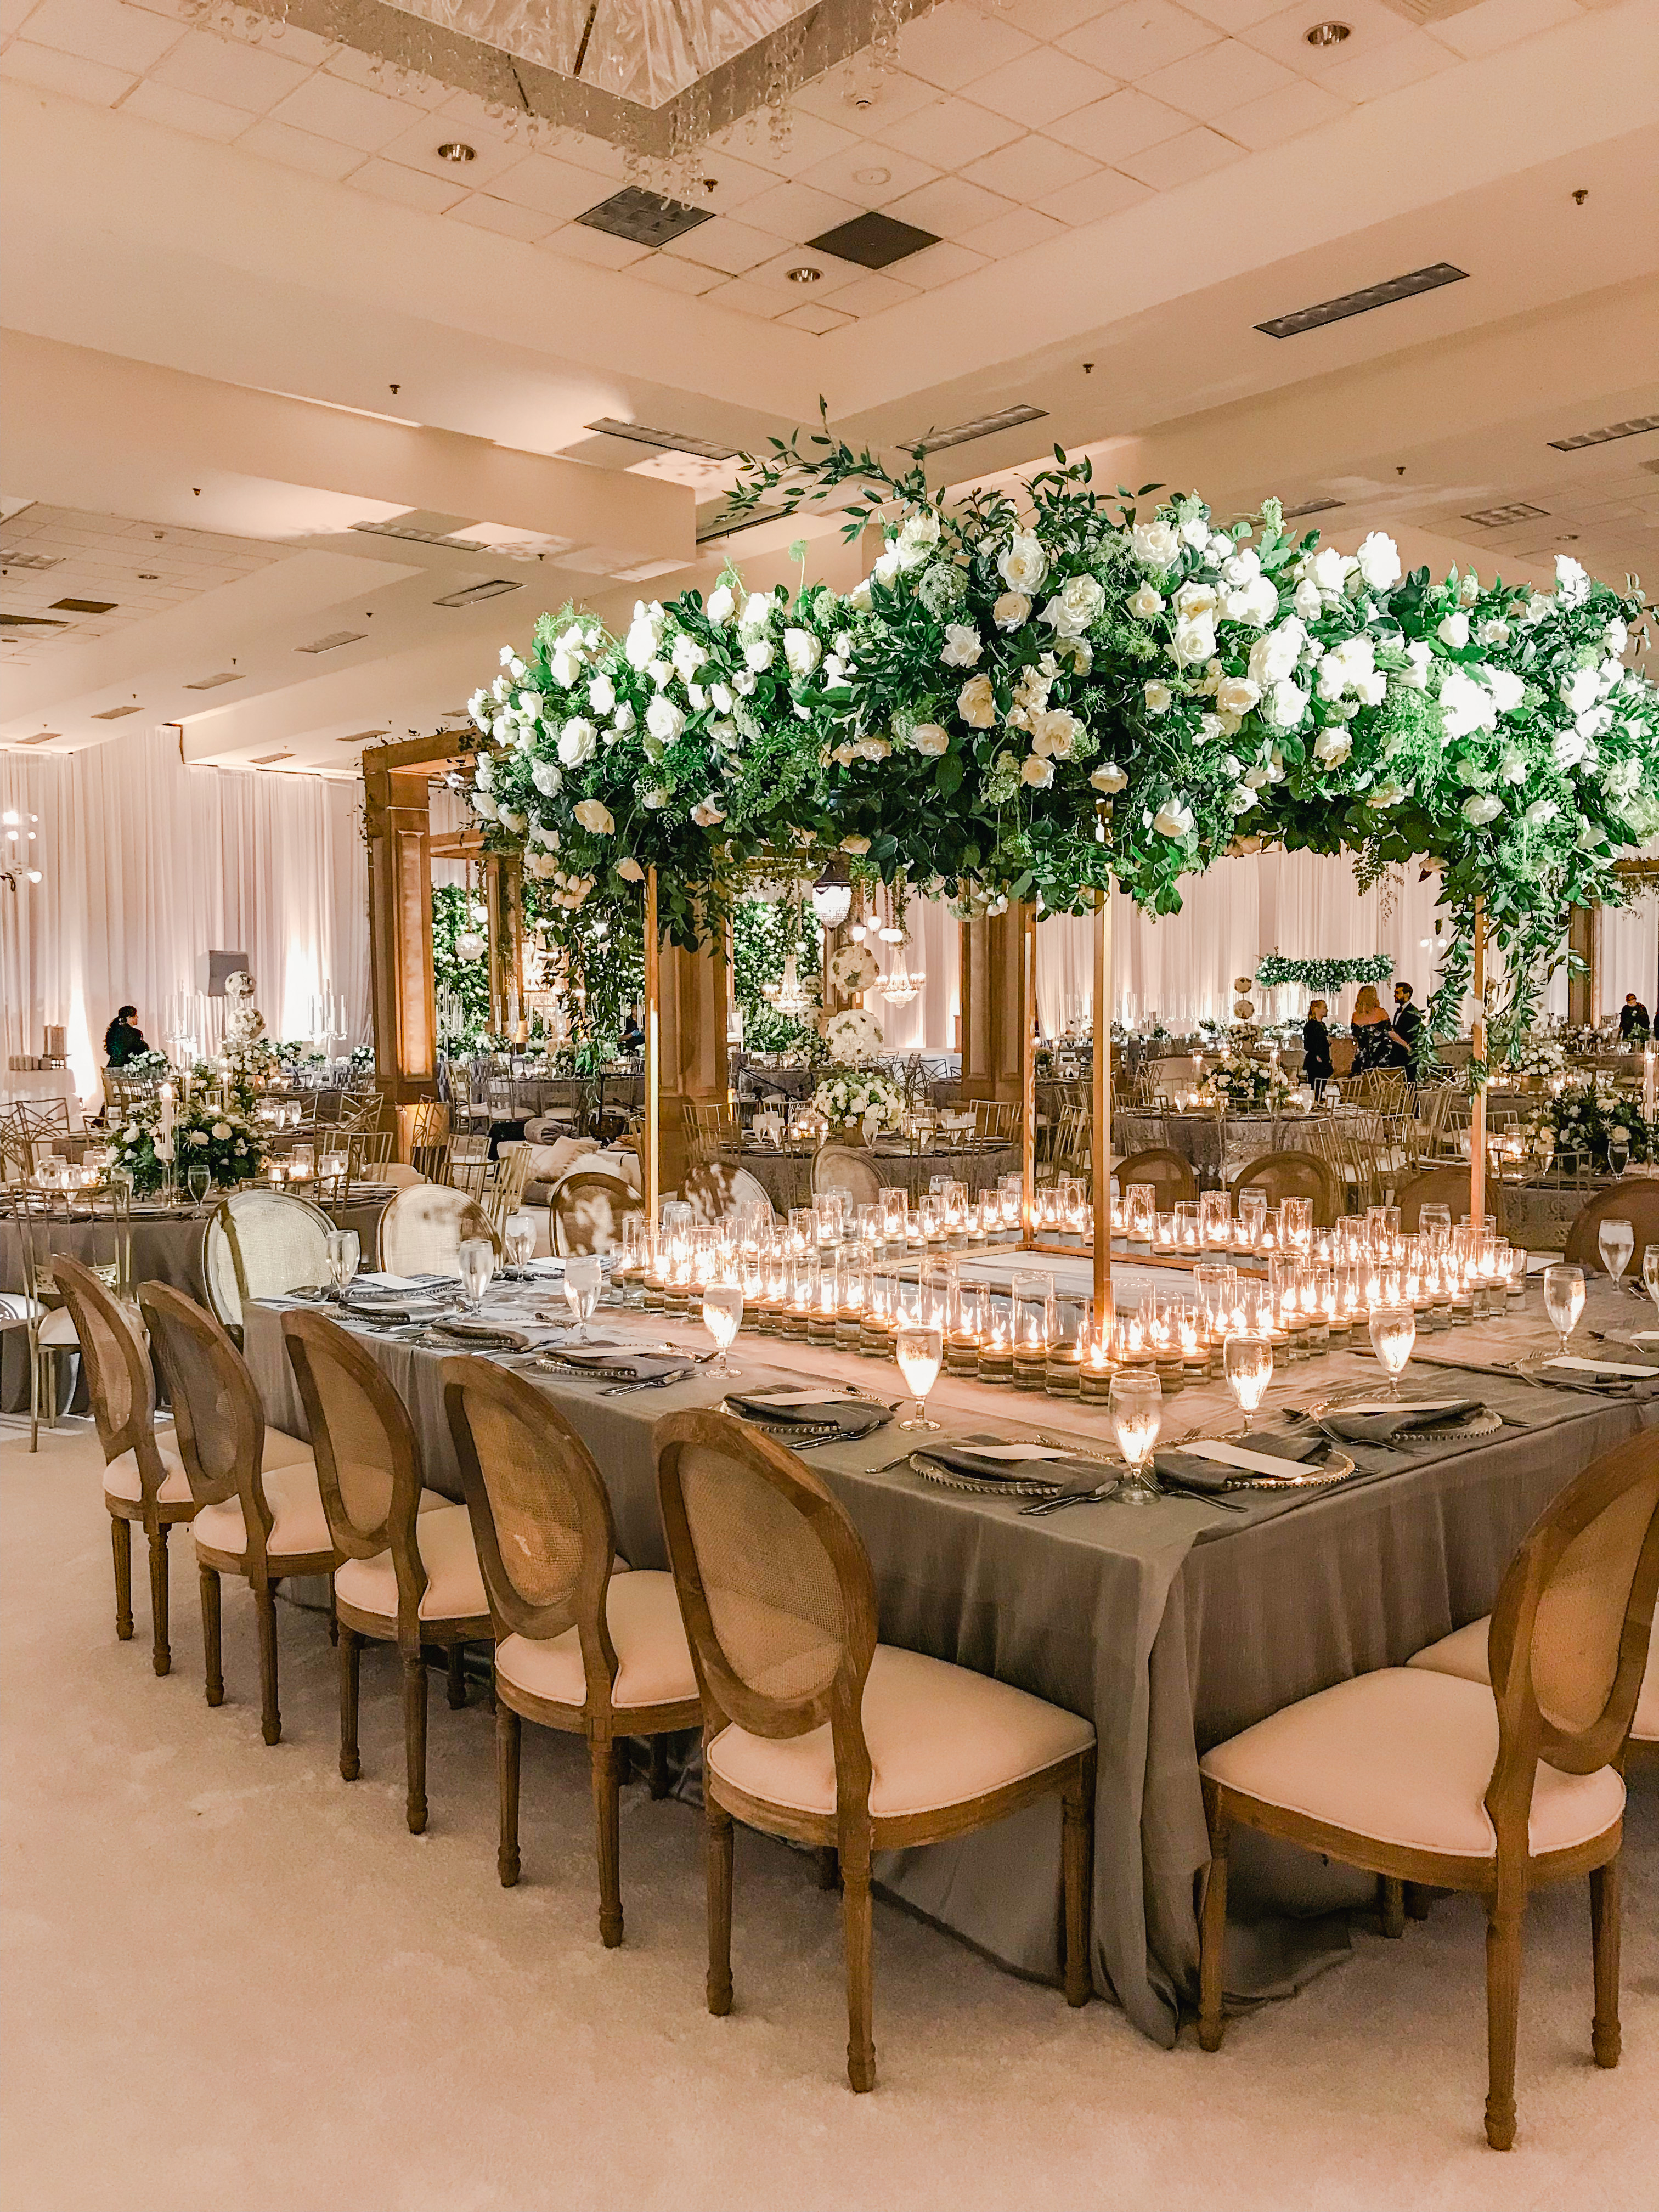 5 Wedding Reception Table Layouts Your, How To Arrange Tables For A Wedding Reception